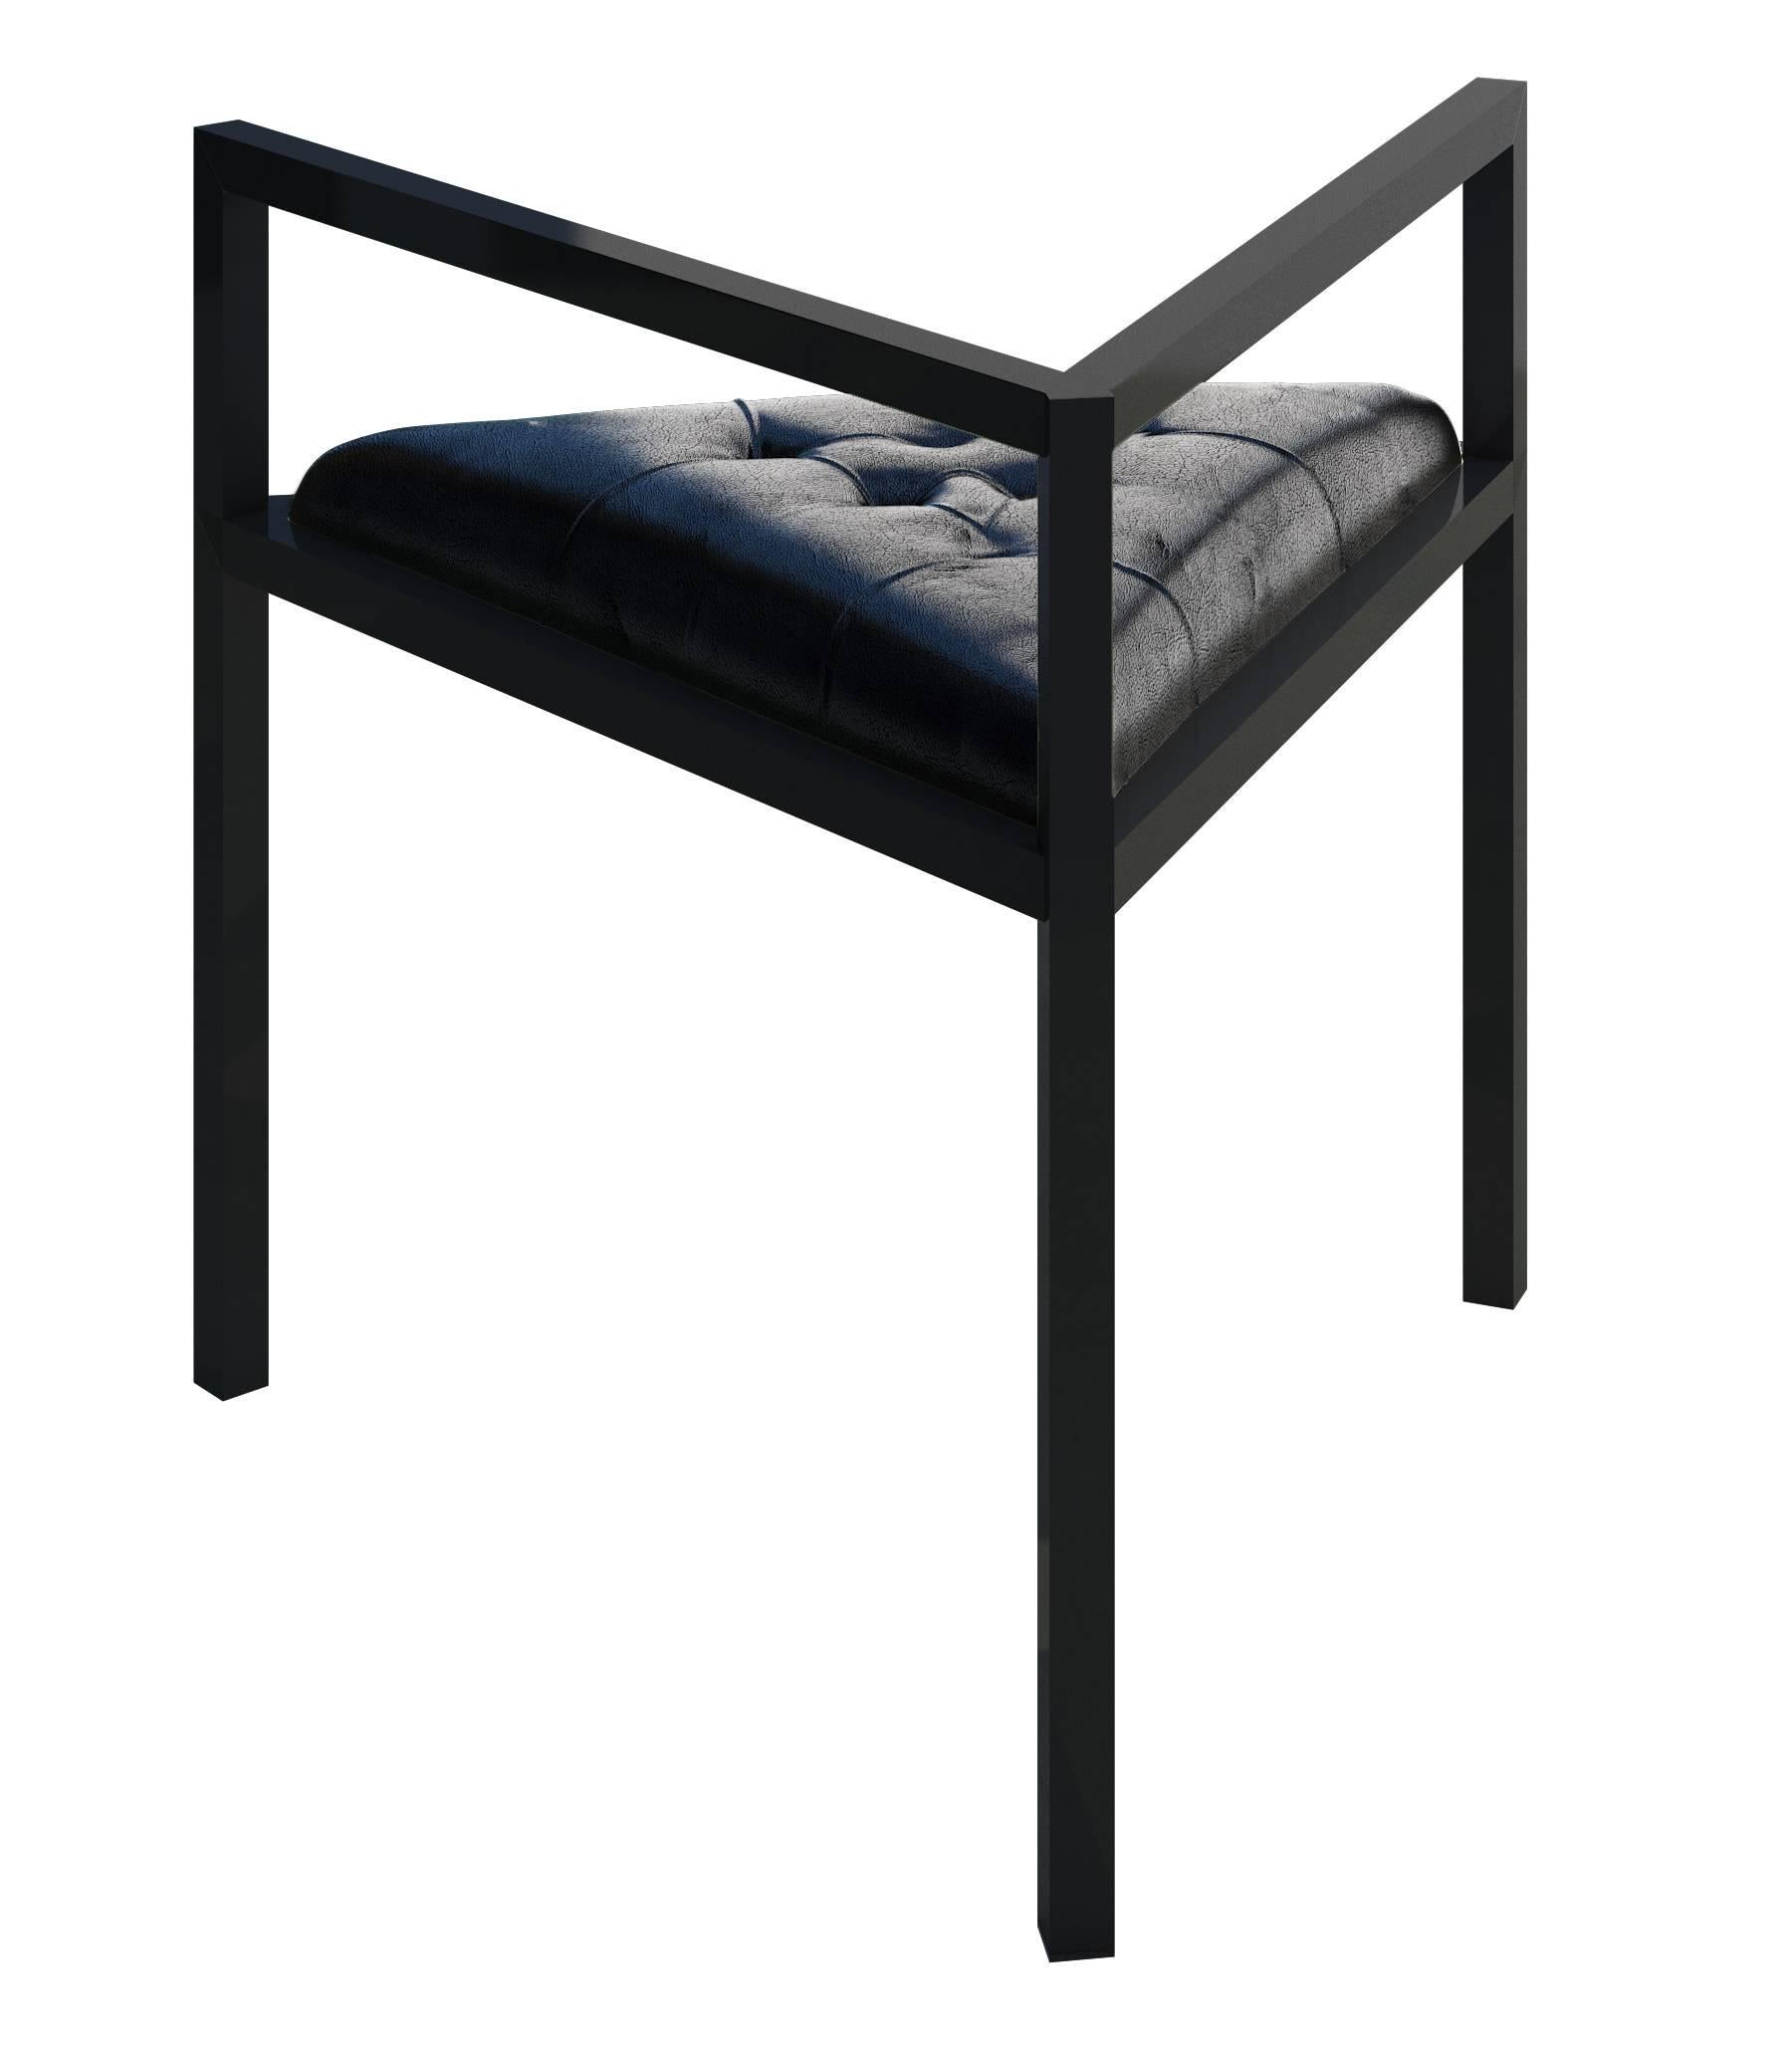 This luxury velvet / metal accent chair is a stunning modern design. The gorgeous design of this streamlined modern seat includes a strong metal frame with a gorgeous tufted seat. It redefines the elegant, sophisticated modern chair design with it's